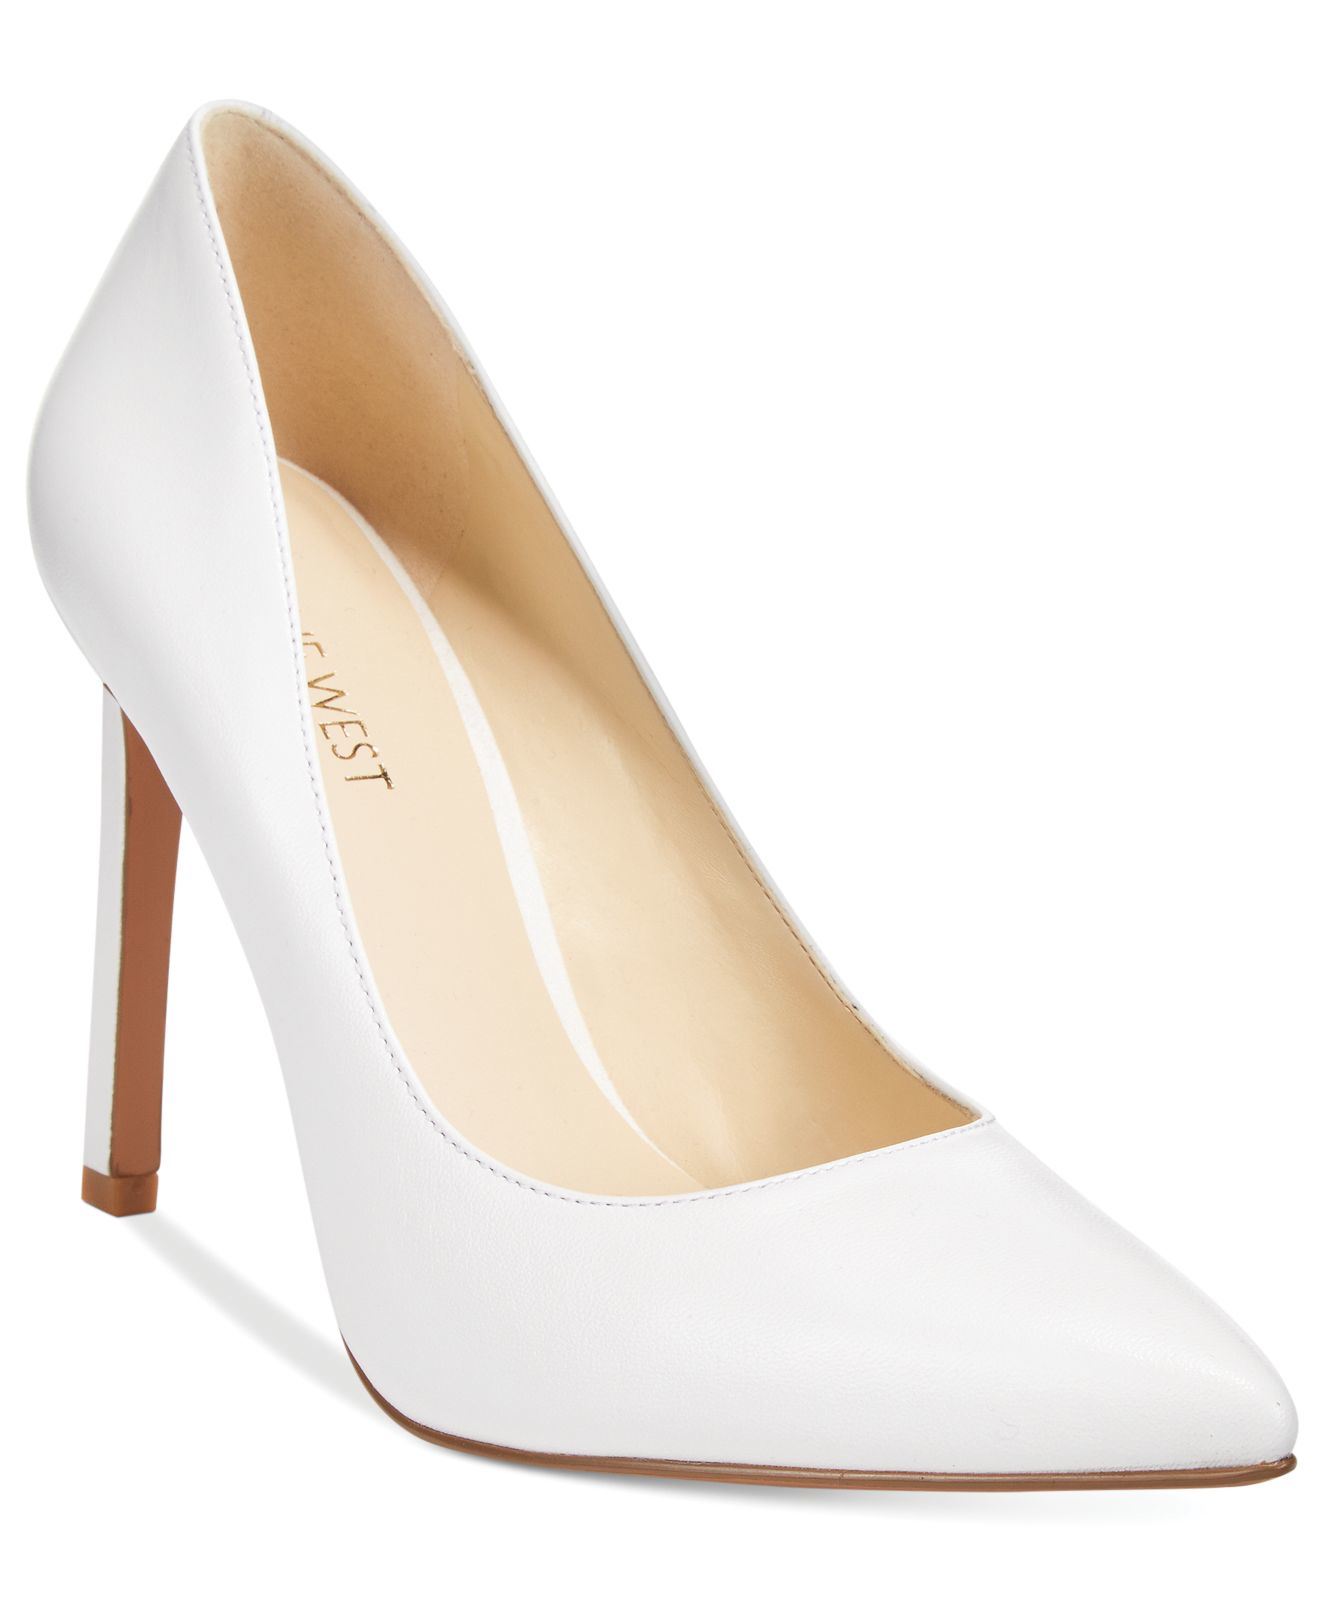 Nine west Tatiana Pumps in White (White Leather) - Save 12% | Lyst